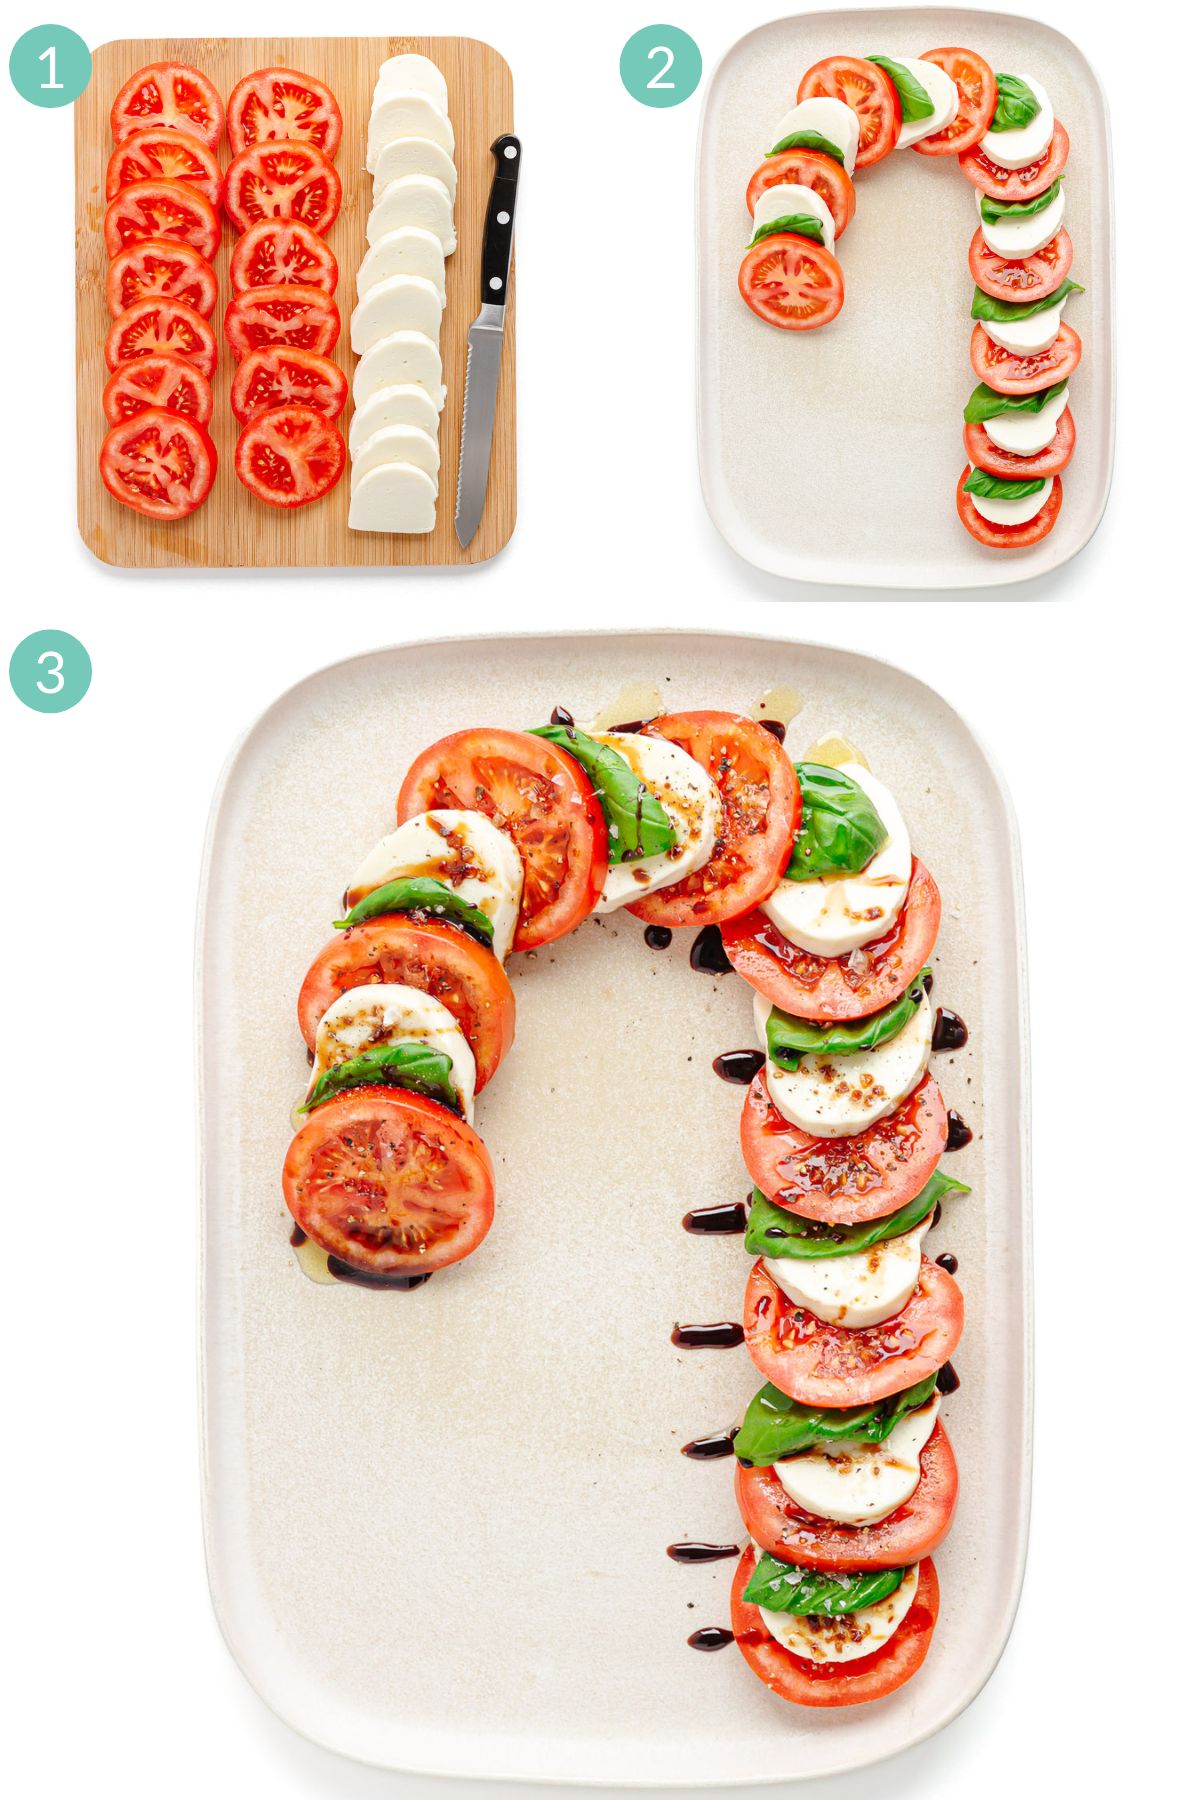 Numbered photo collage showing step-by-step how to make a candy cane caprese salad for Christmas.